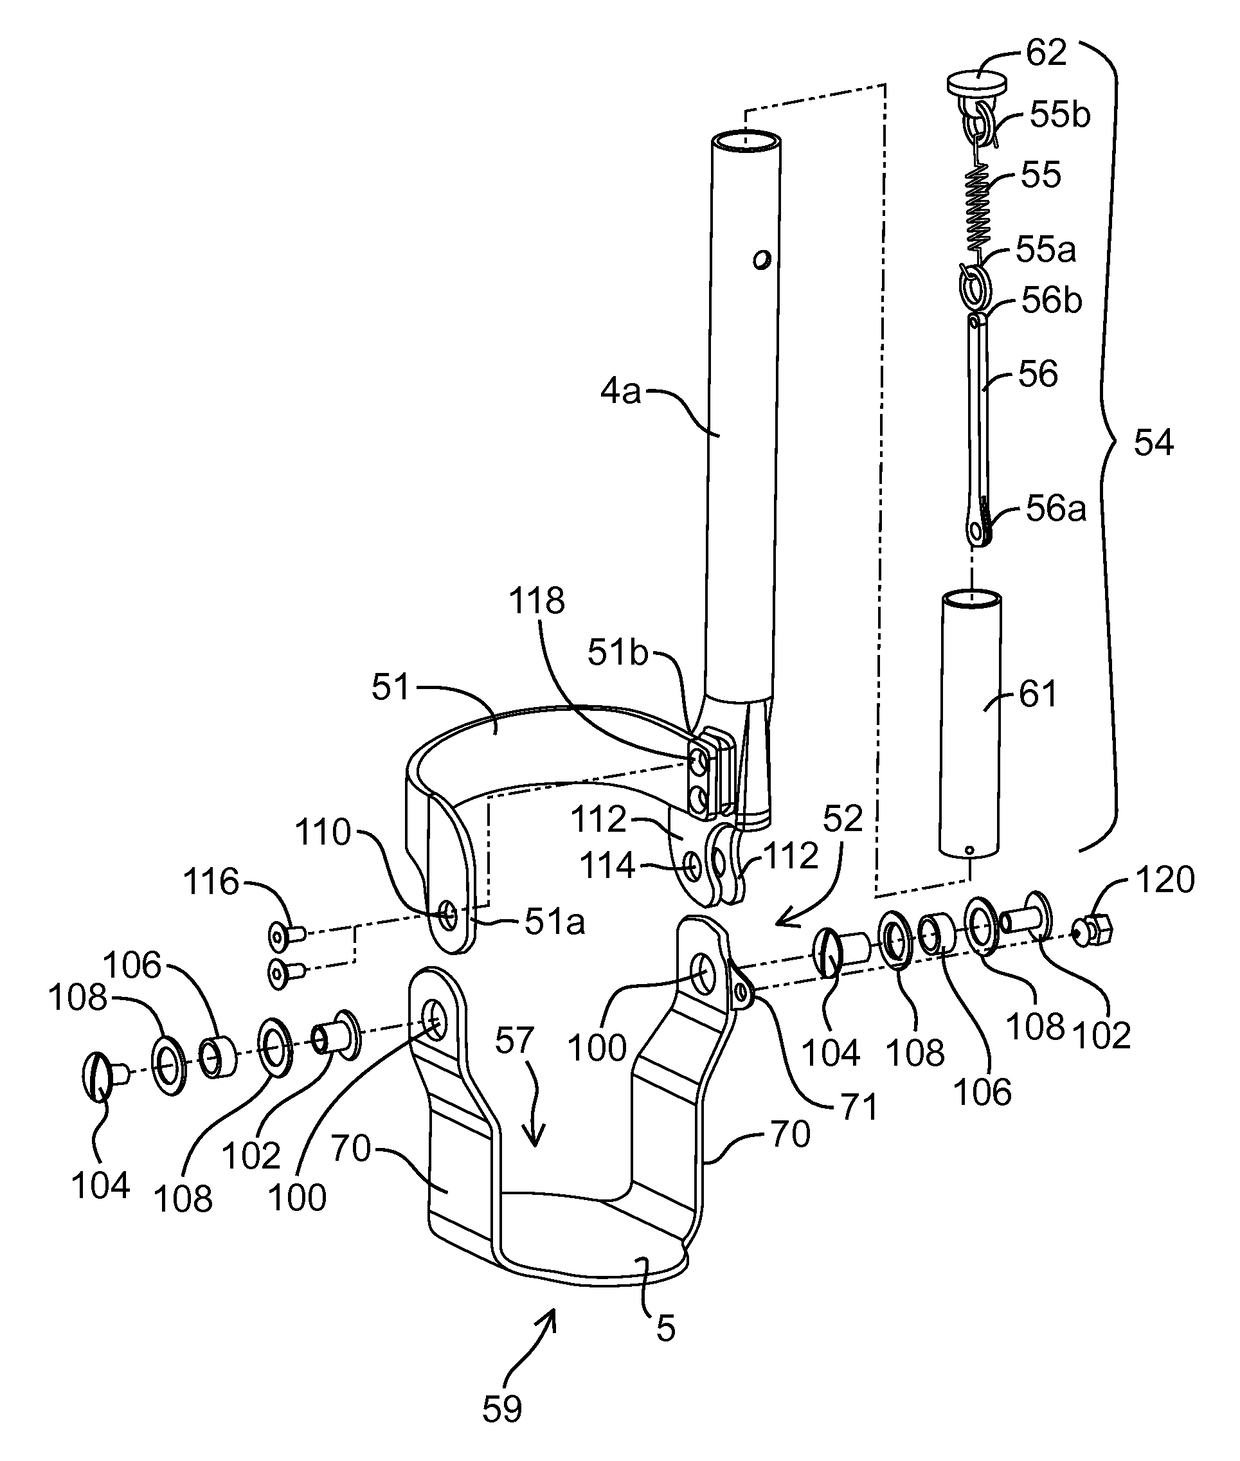 Foot plate assembly for use in an exoskeleton apparatus